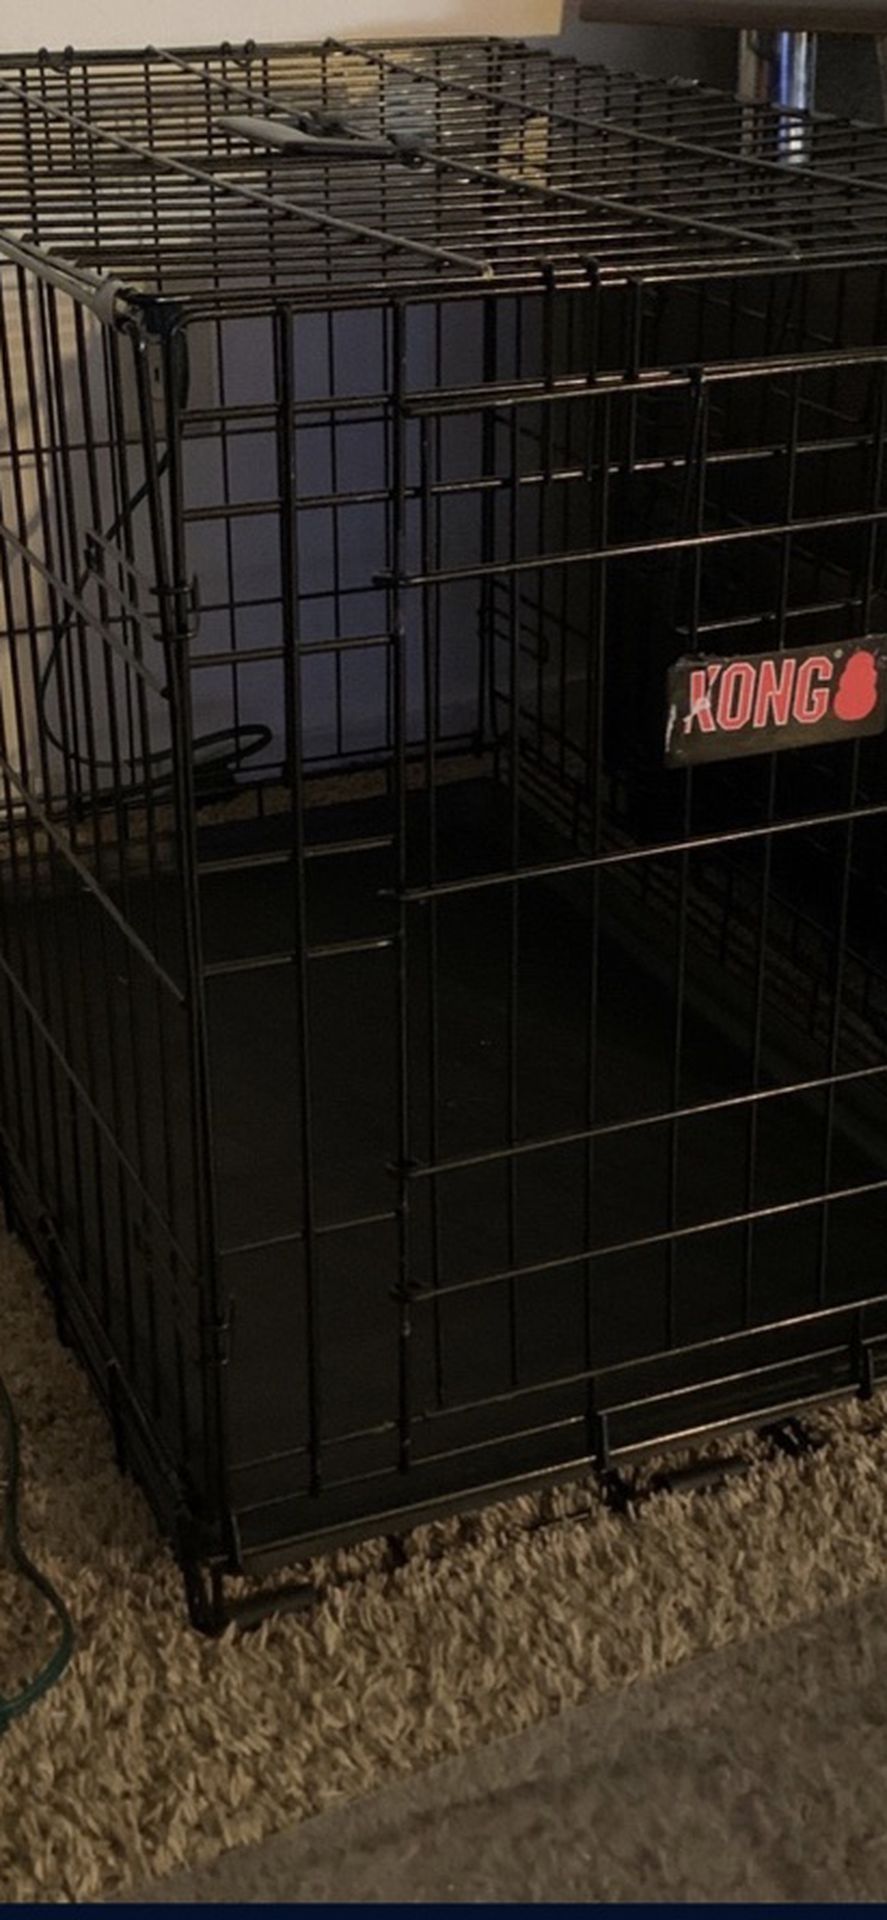 Dog Crate / Kennel